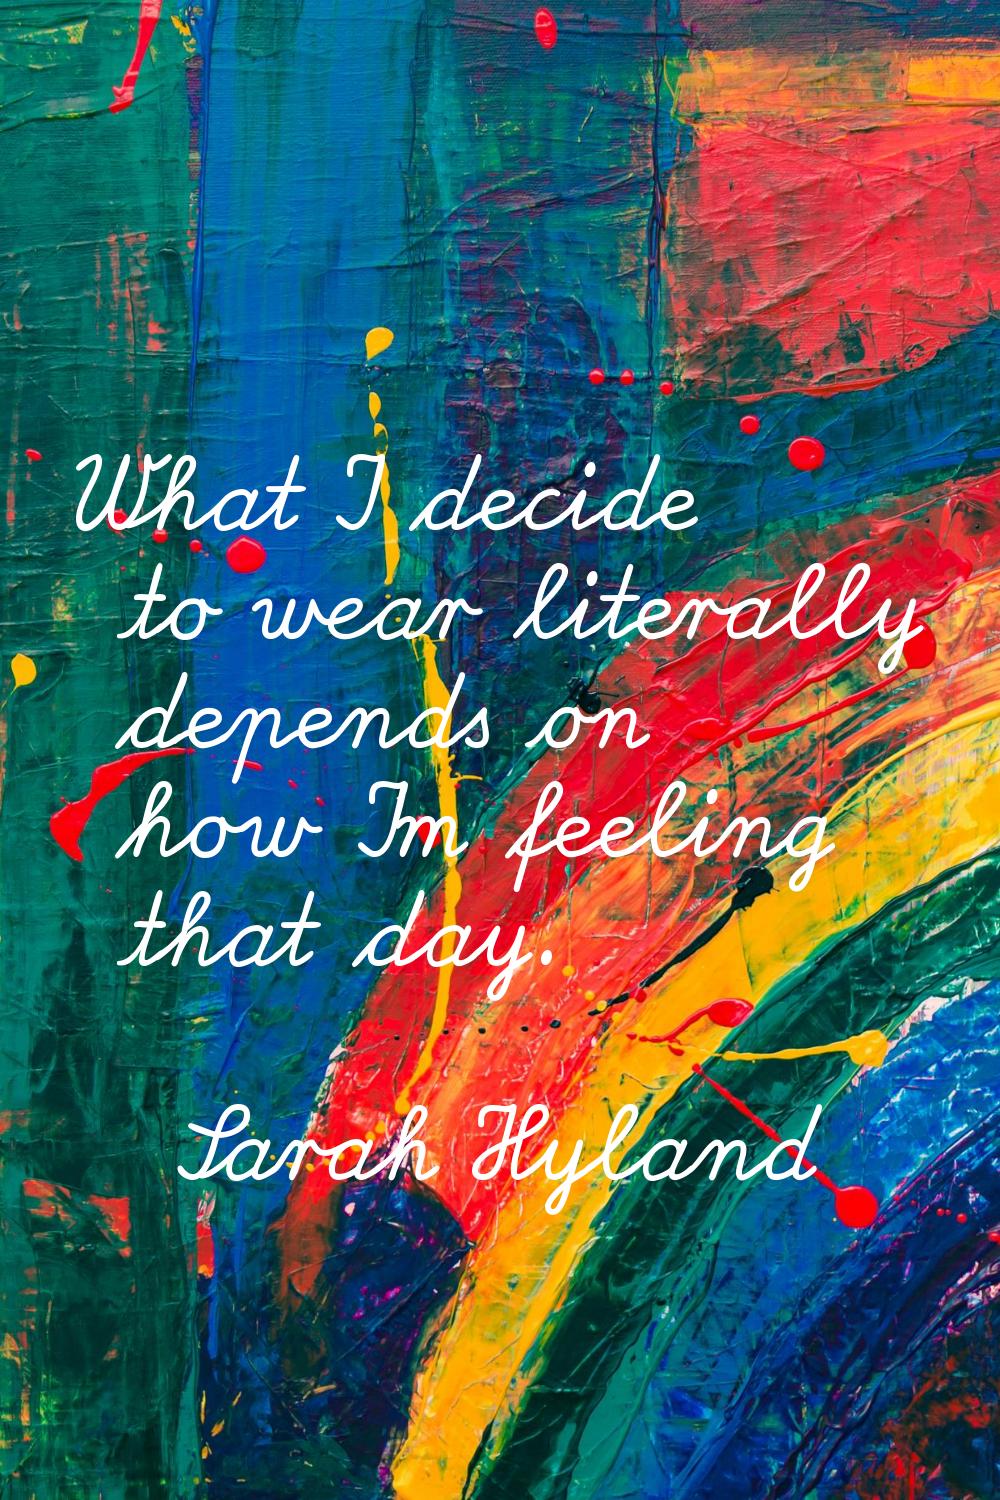 What I decide to wear literally depends on how I'm feeling that day.